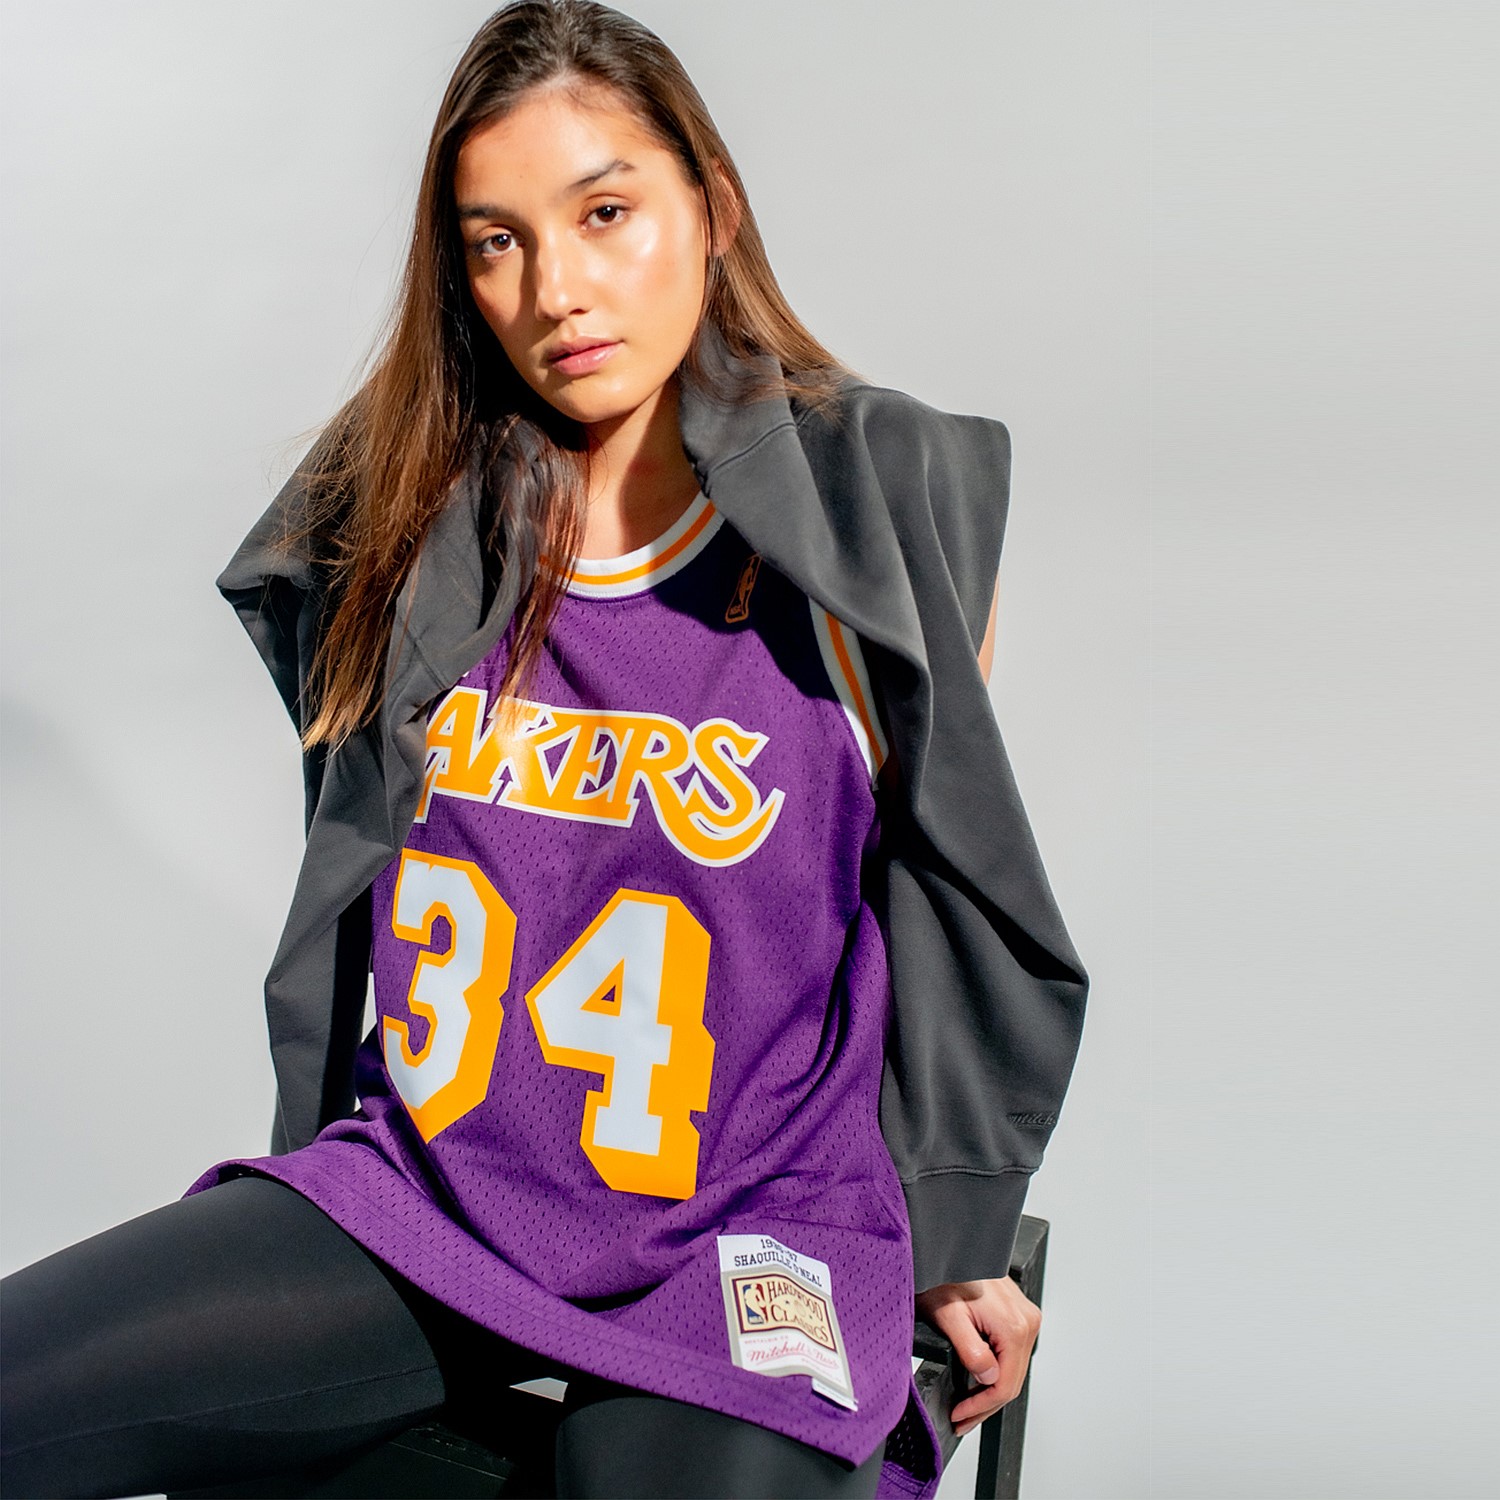 lakers jersey over hoodie